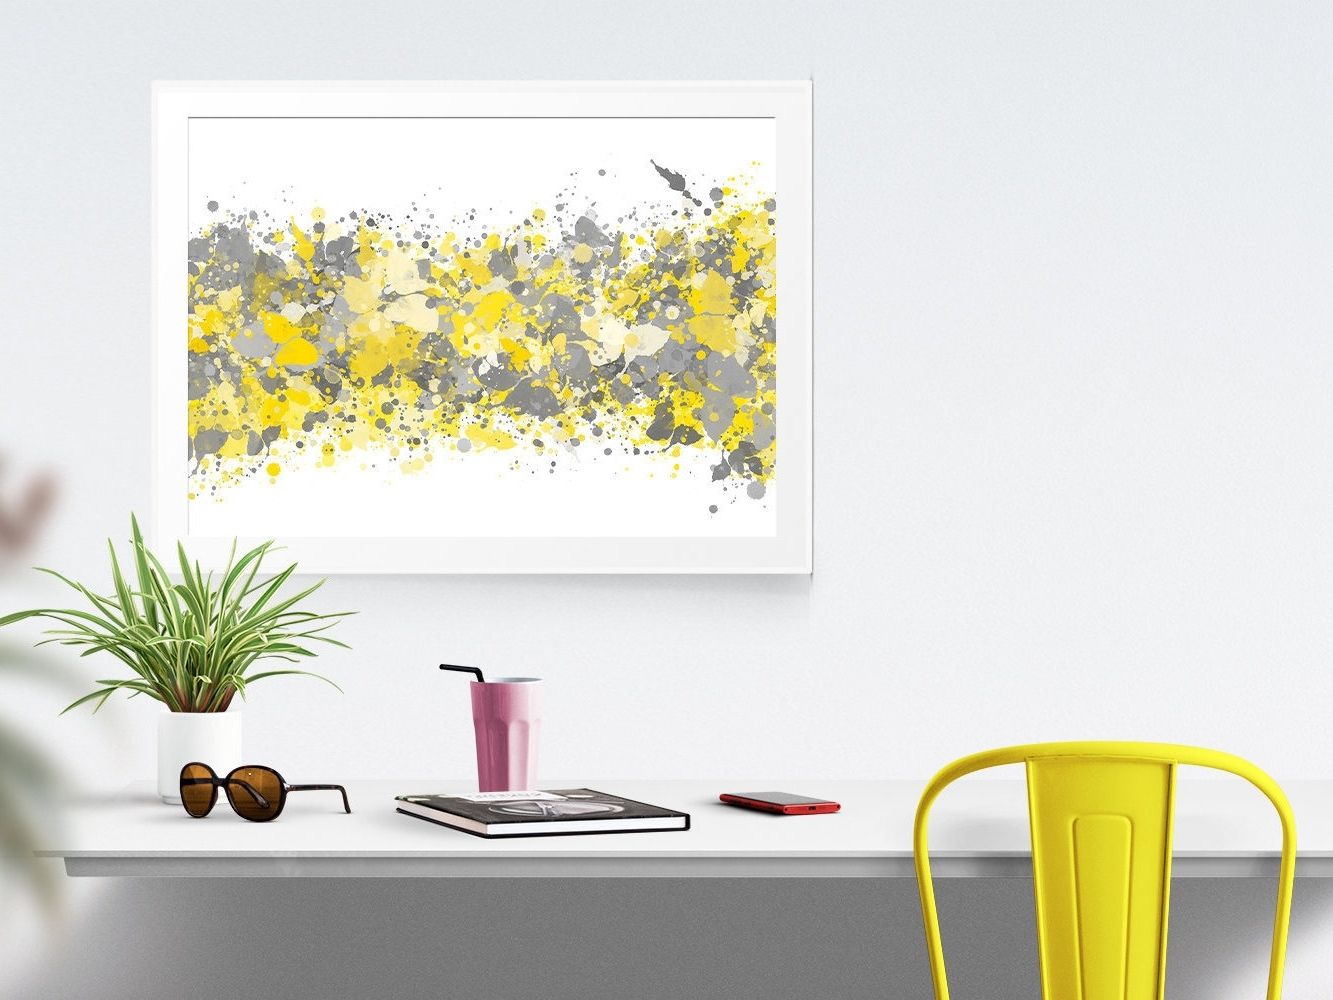 Large Yellow Wall Art Inside Most Up To Date Captivating 25+ Gray And Yellow Wall Art Design Ideas Of Best 25+ (View 15 of 15)